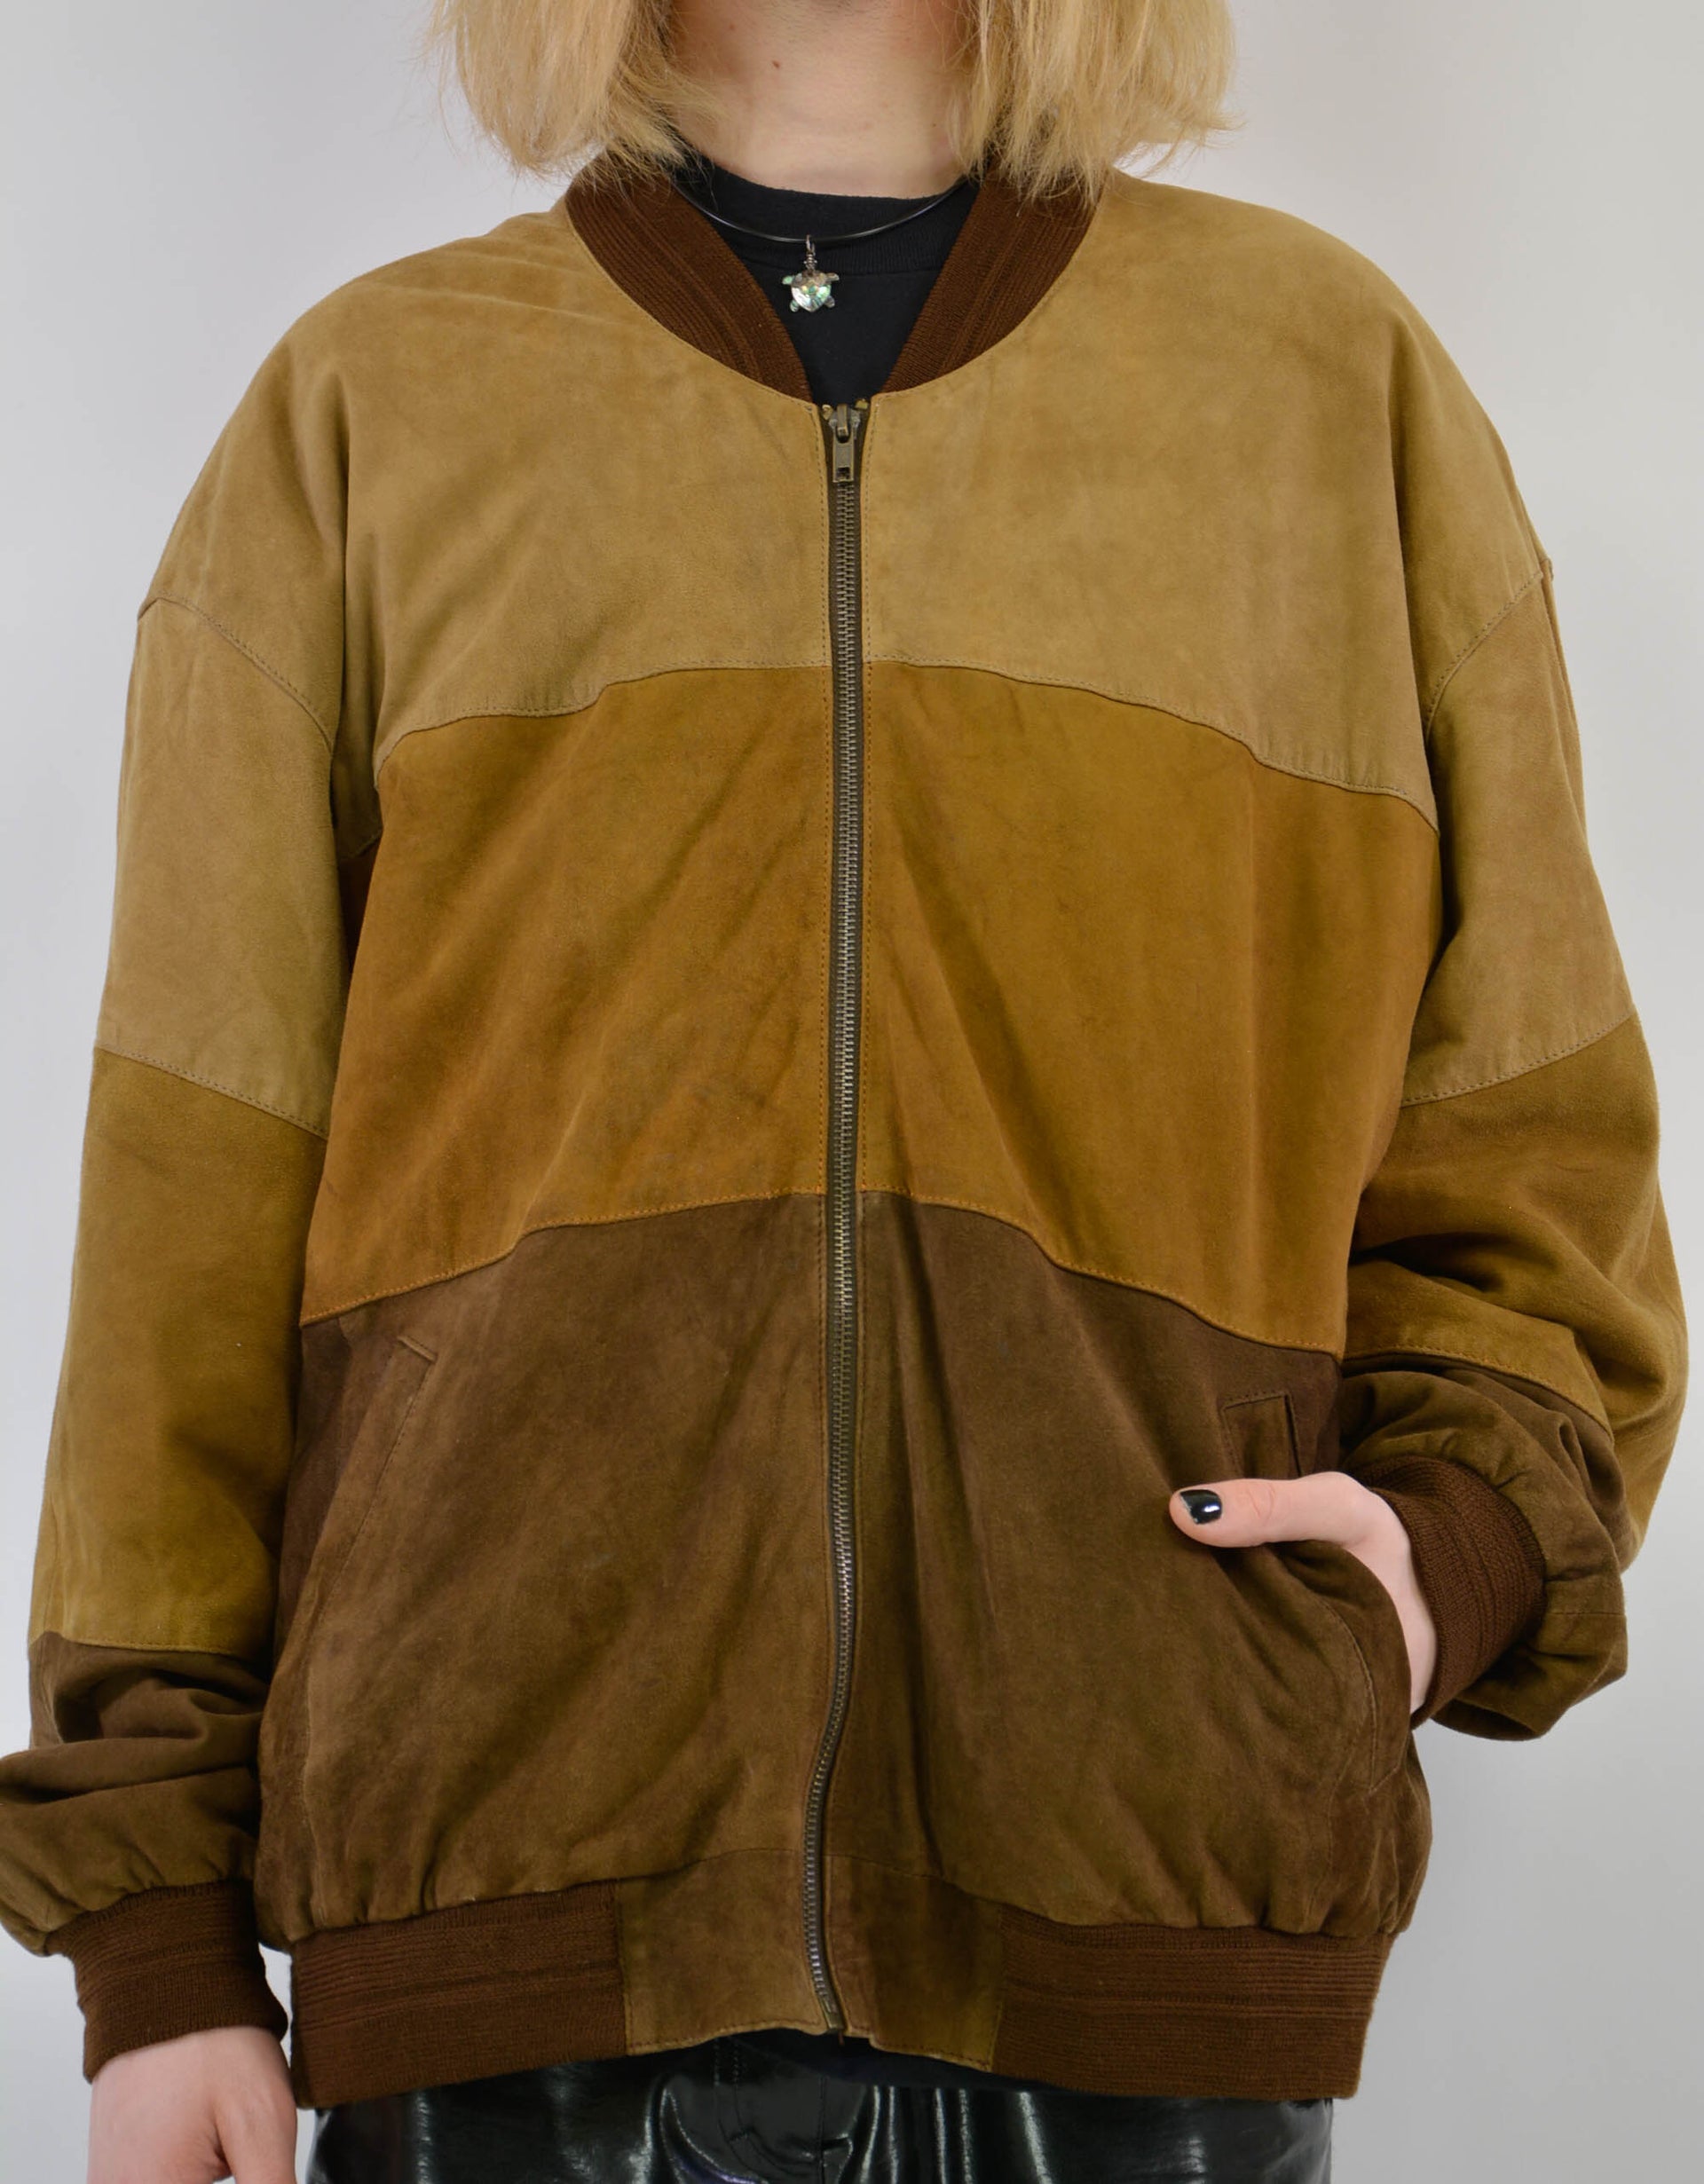 Suede leather jacket - PICKNWEIGHT - VINTAGE KILO STORE